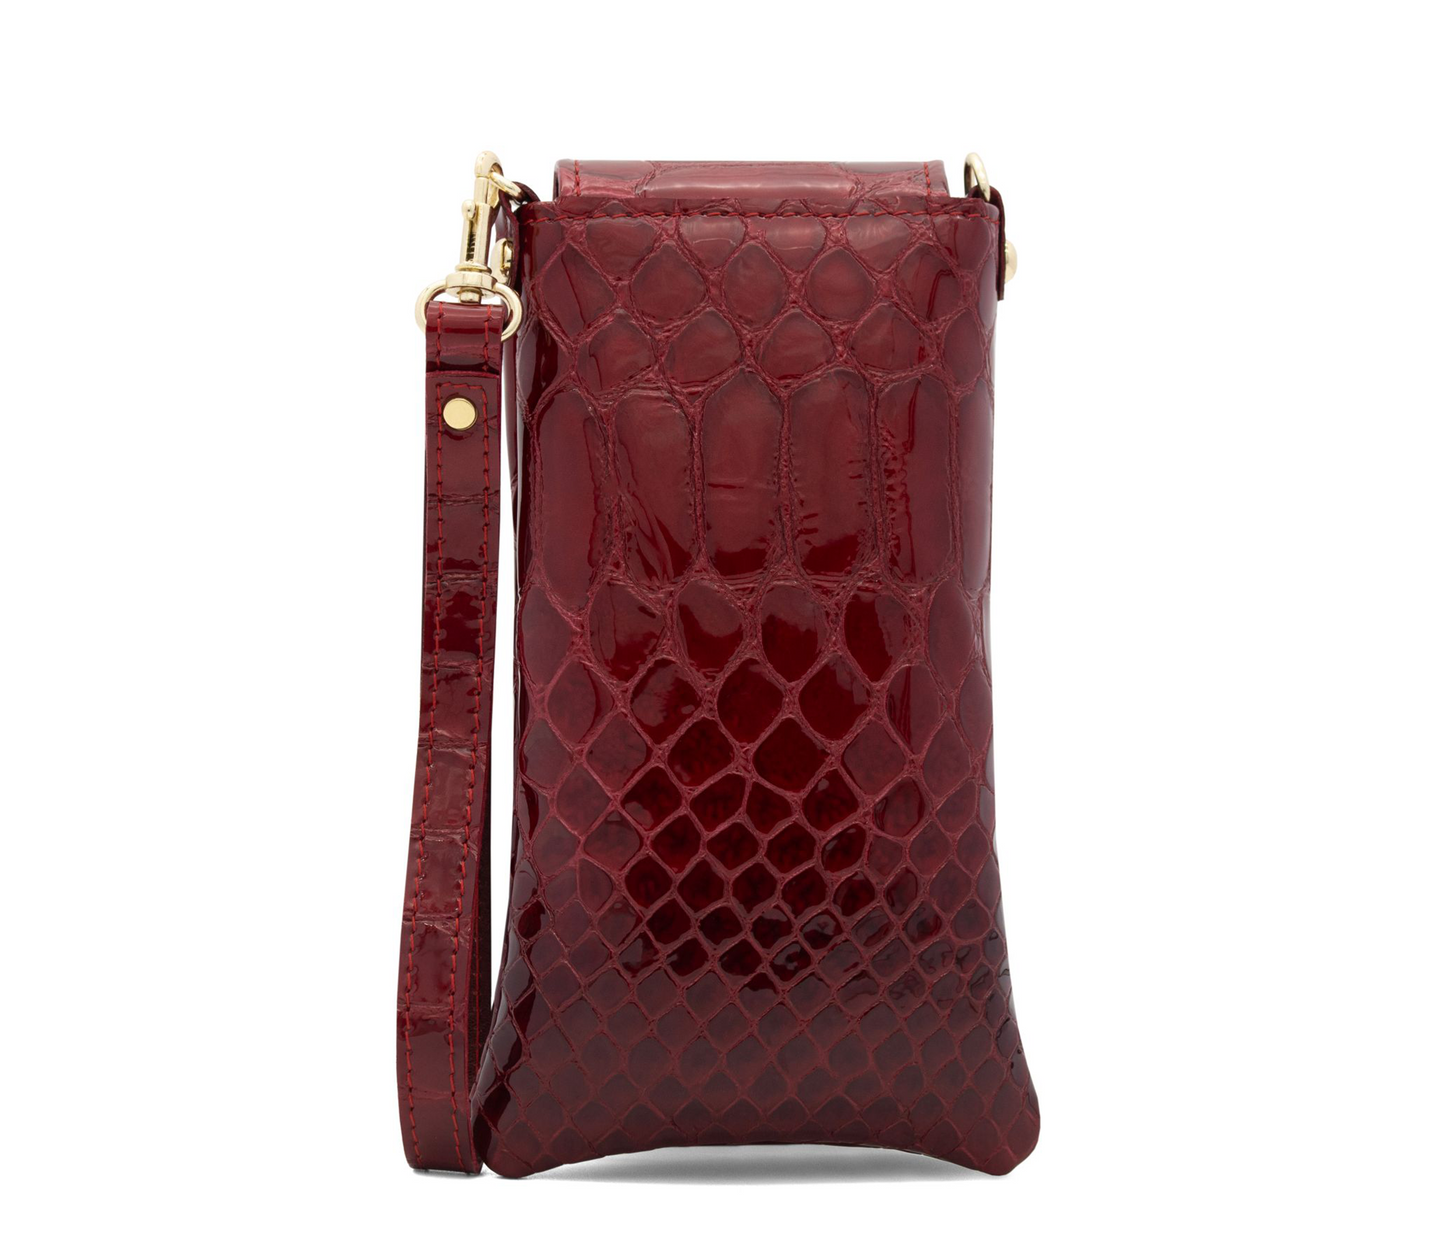 #color_ Red | Cavalinho Gallop Patent Leather Pouch - Red - Artboard2_45229812-35ad-4398-8ec9-dbdb2c7469b5